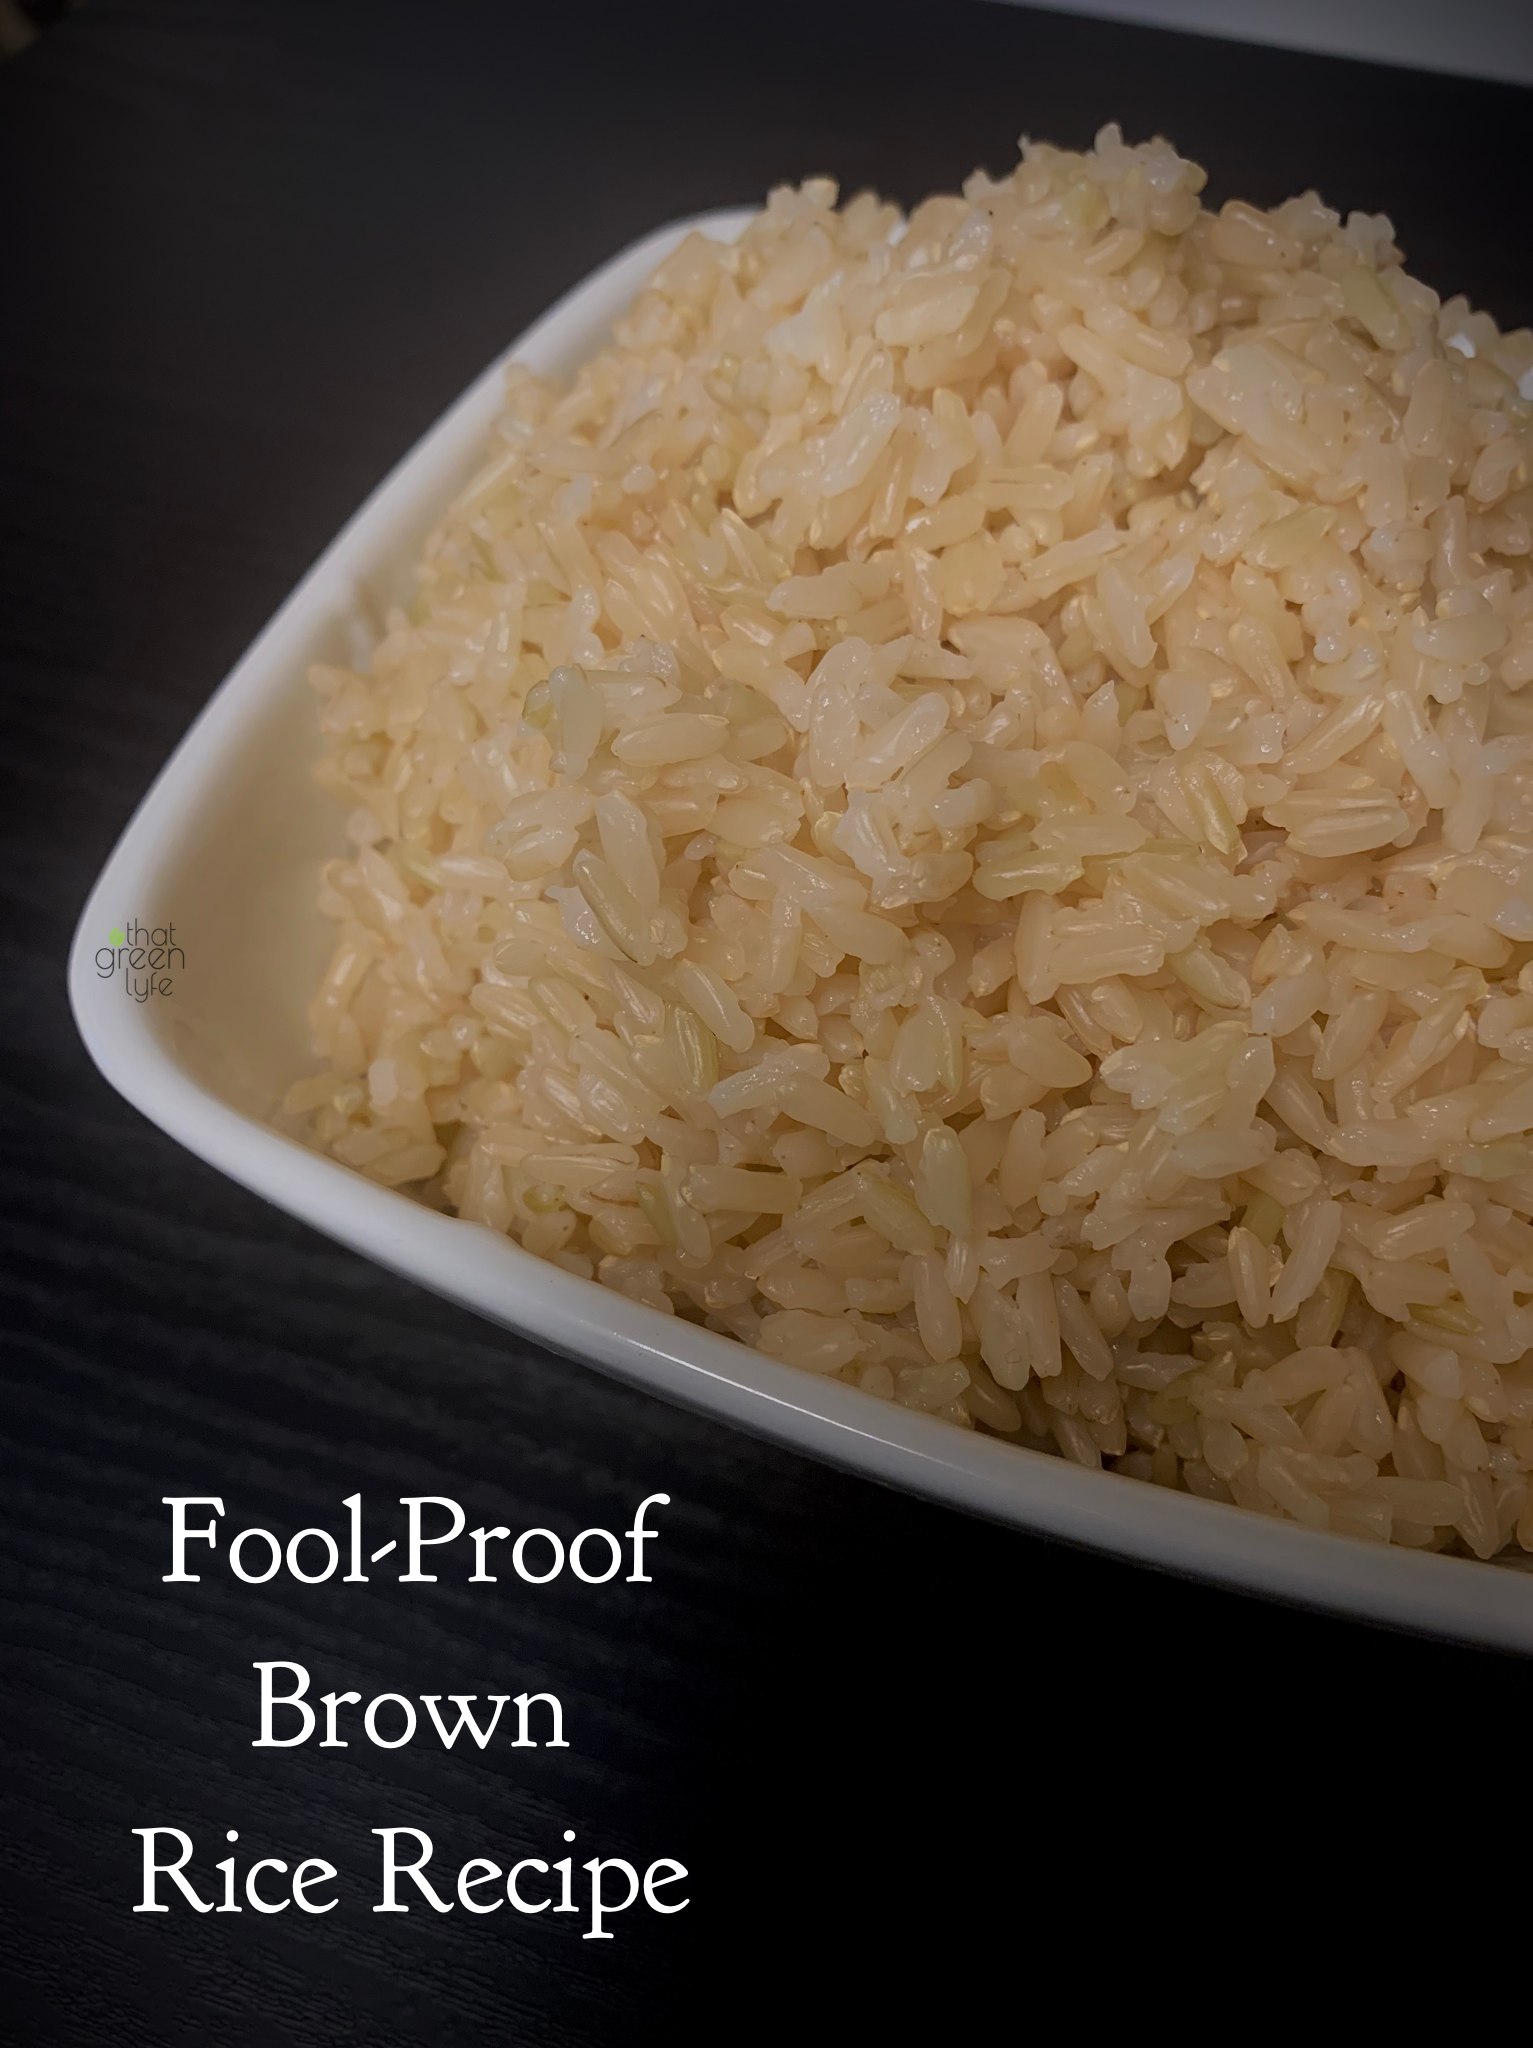 Fool-Proof Brown Rice Recipe courtesy of That Green Lyfe